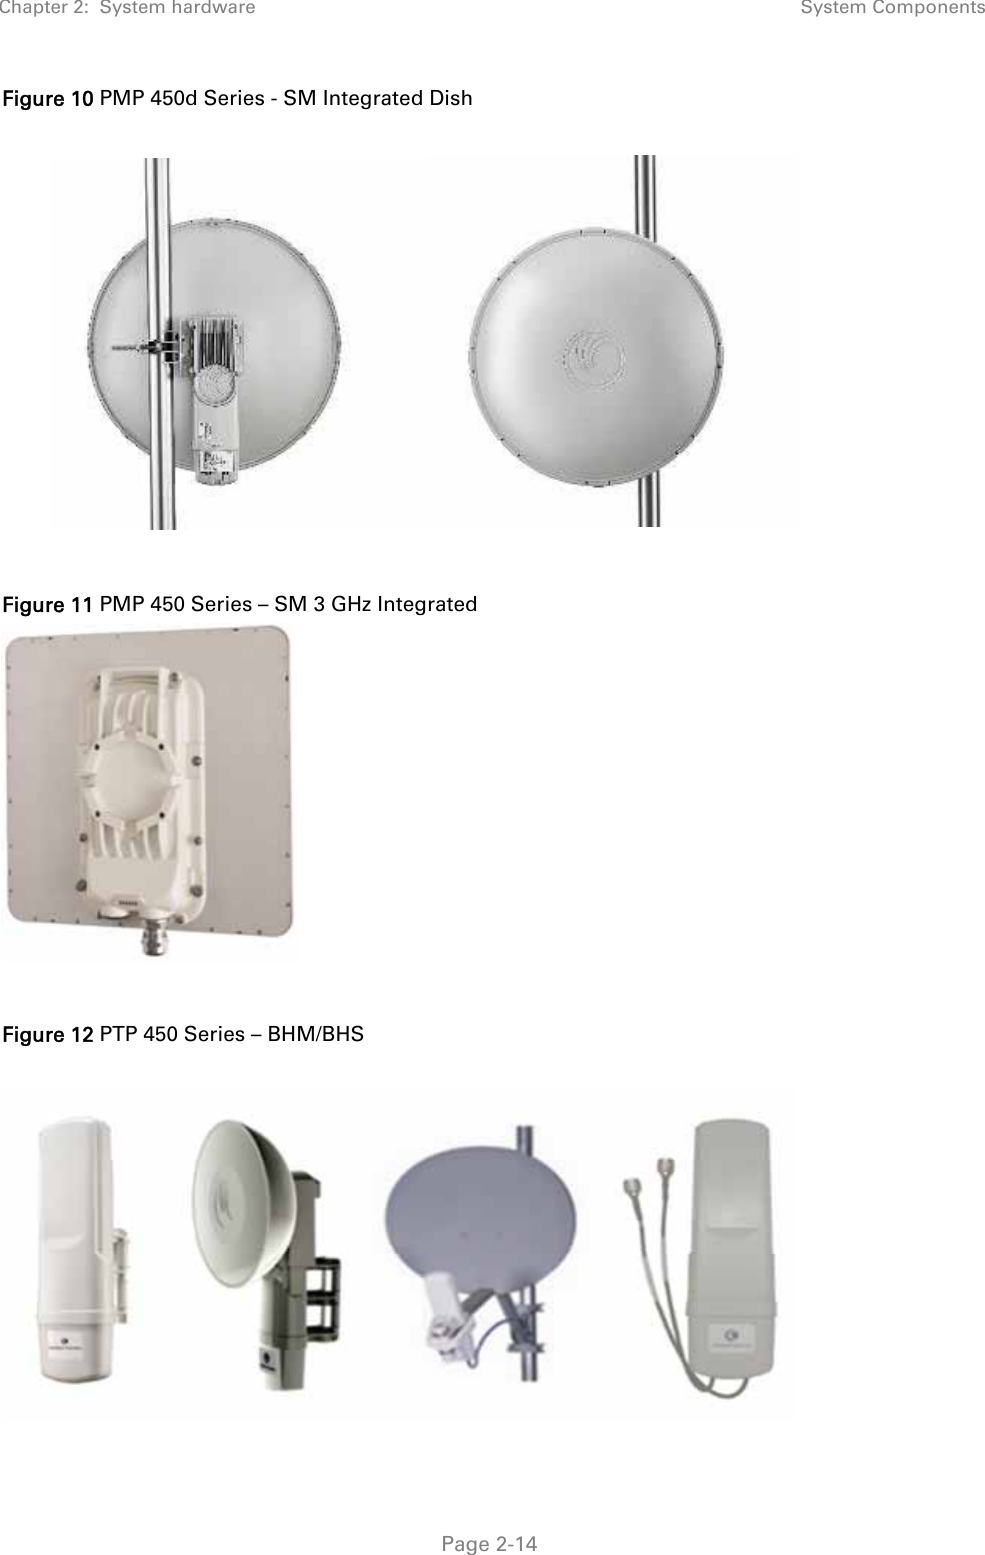 Chapter 2:  System hardware  System Components   Page 2-14 Figure 10 PMP 450d Series - SM Integrated Dish    Figure 11 PMP 450 Series – SM 3 GHz Integrated    Figure 12 PTP 450 Series – BHM/BHS   